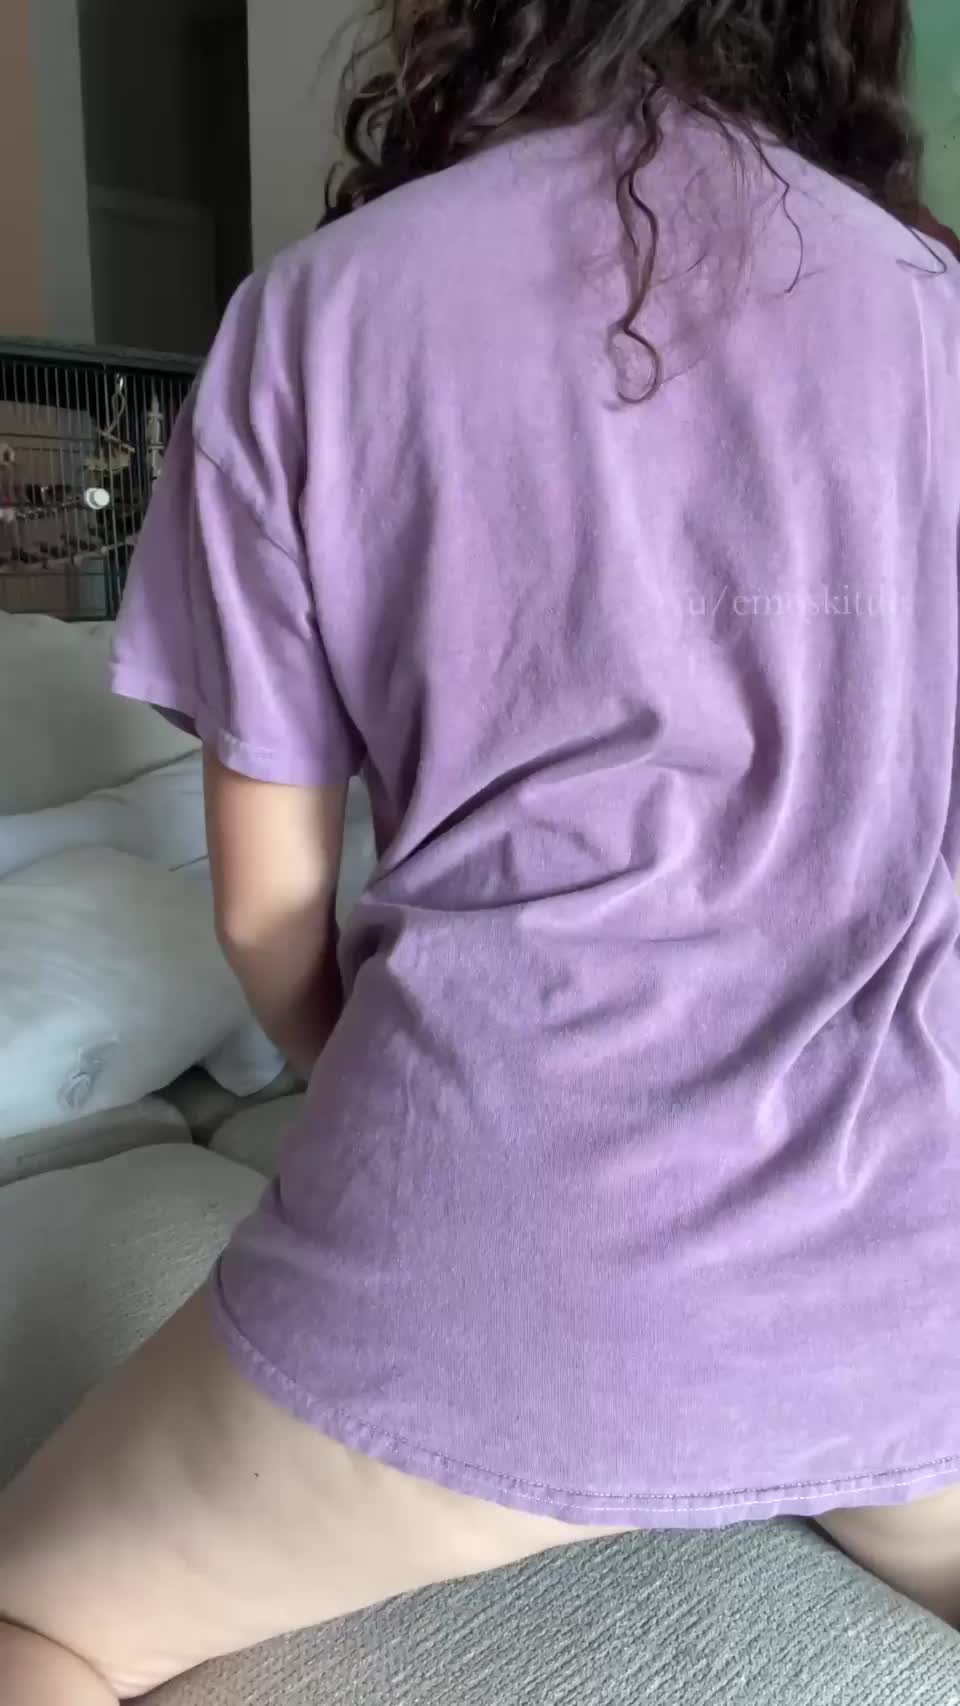 fuck my pussy from the back ☺️ : video clip